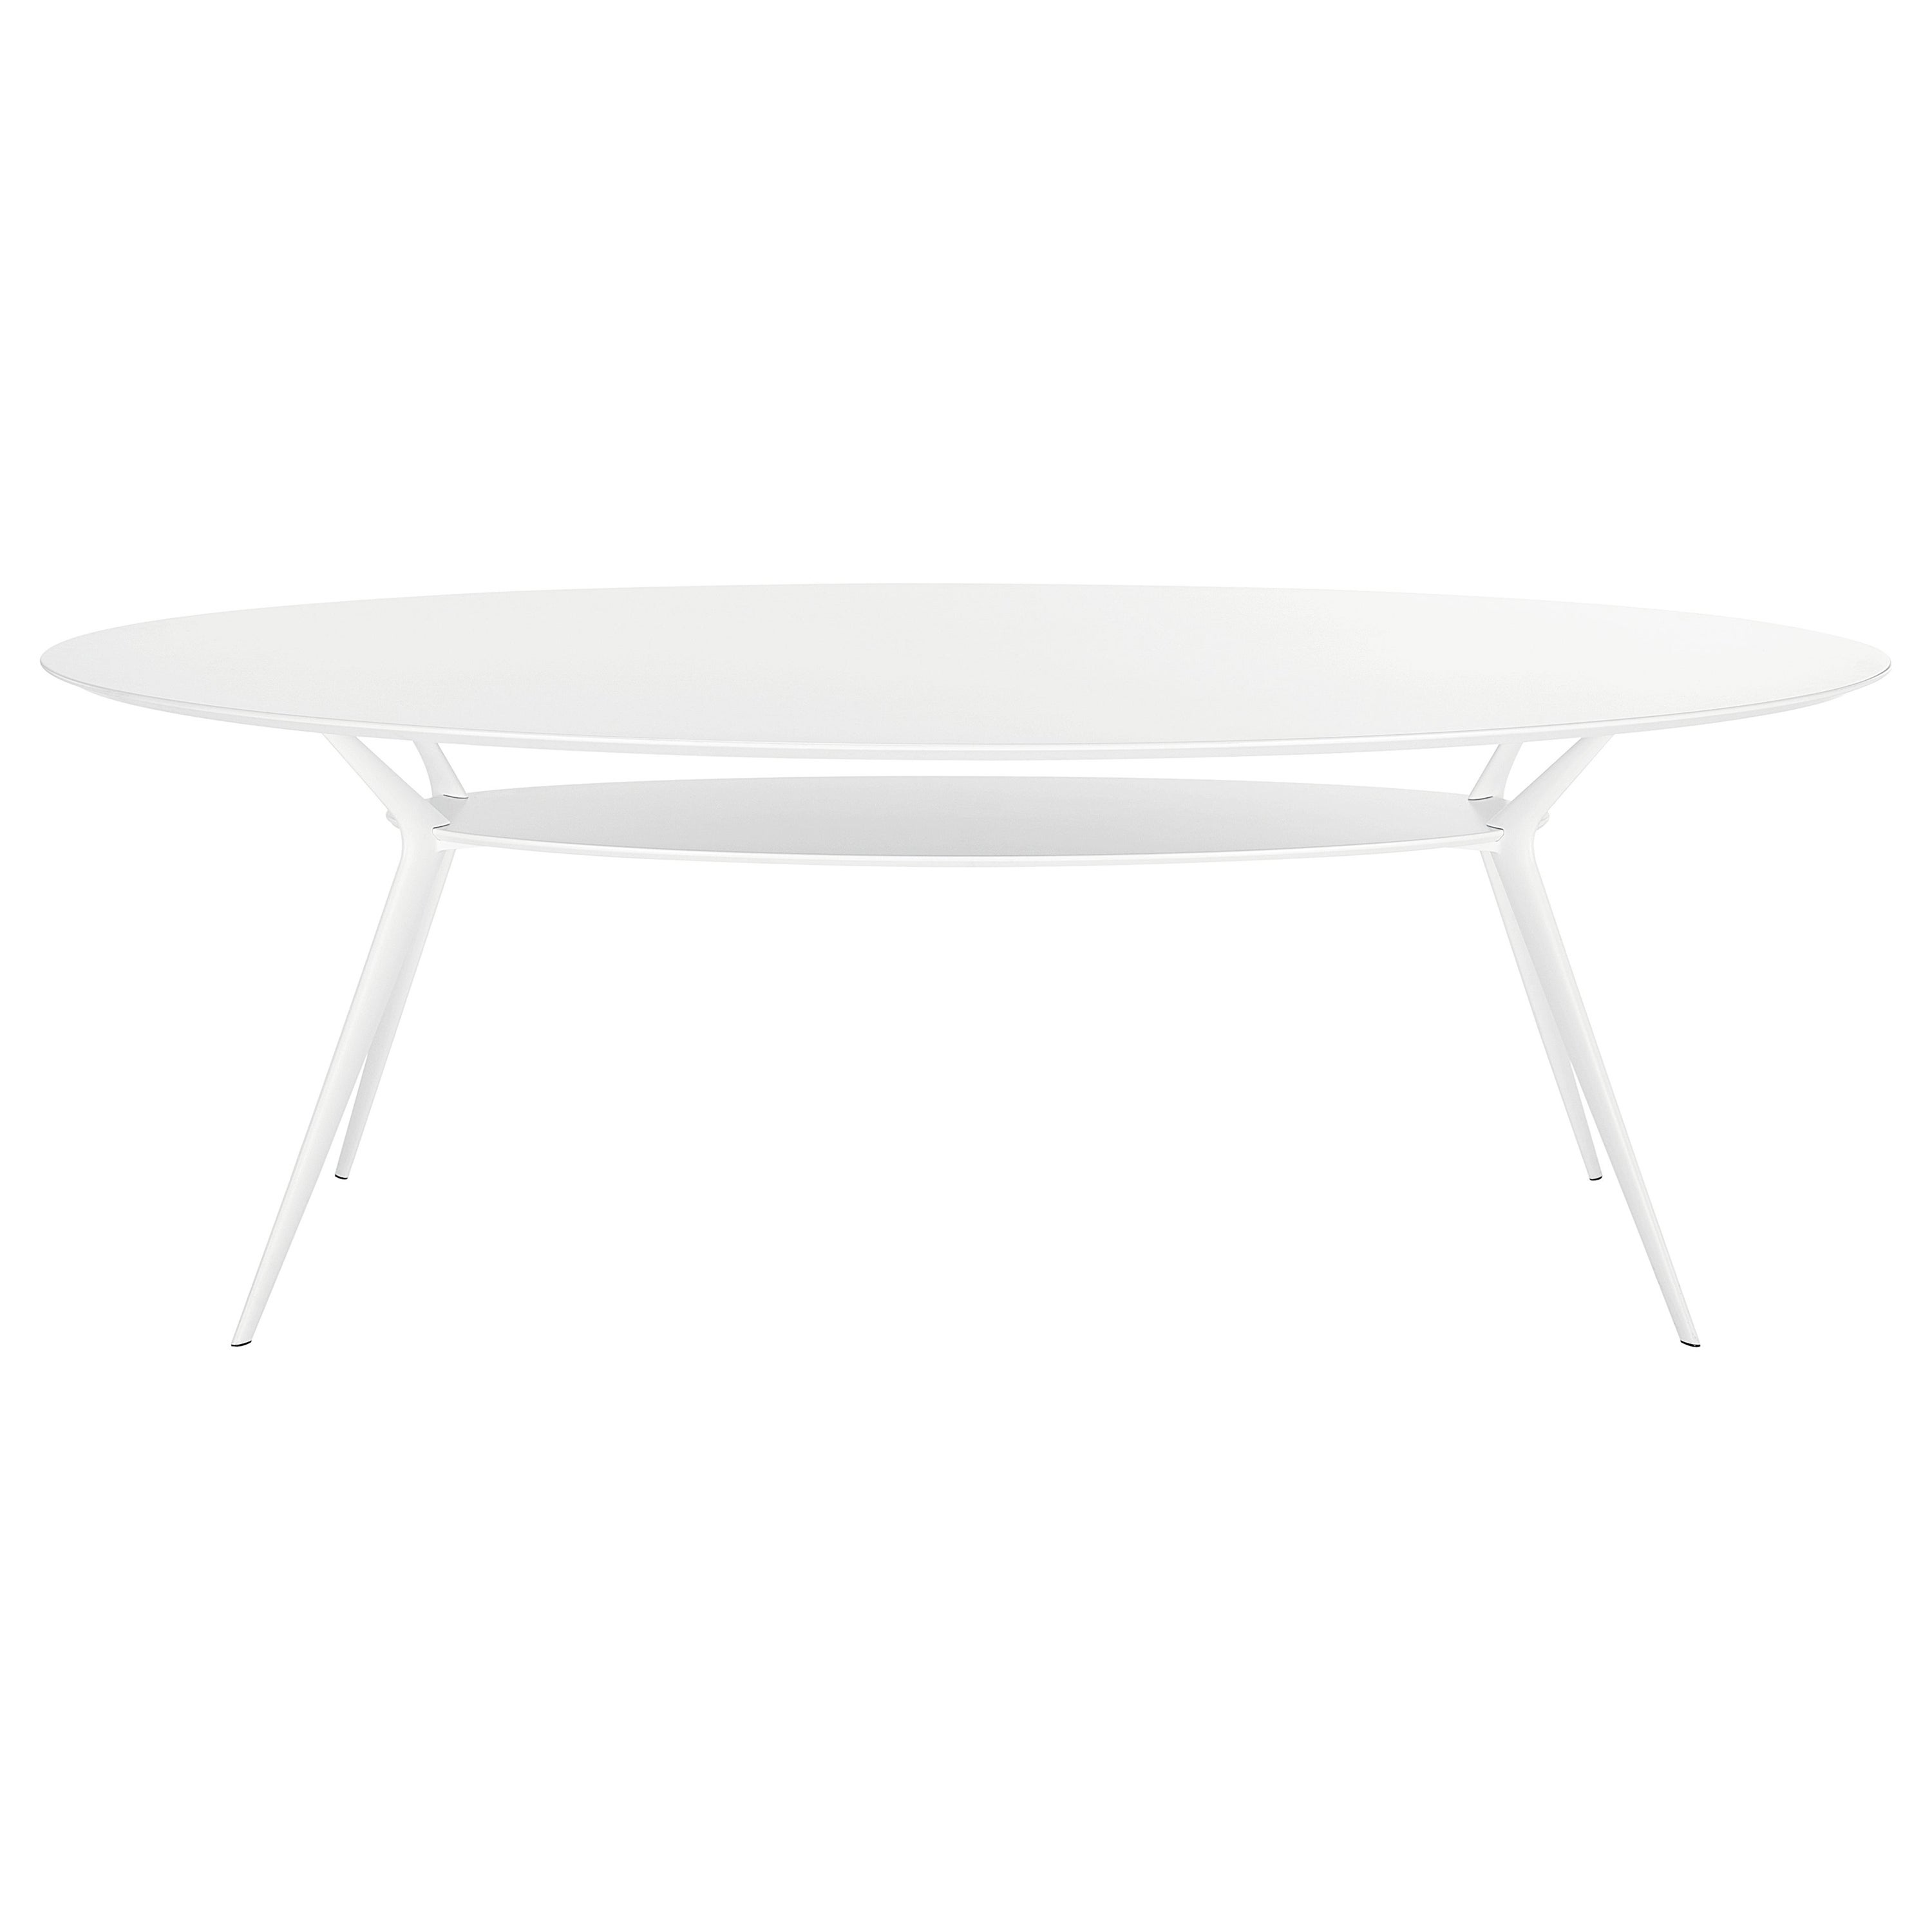 Alias Biplane 407 Oval Table in White MDF Top and White Polished Aluminium Frame For Sale